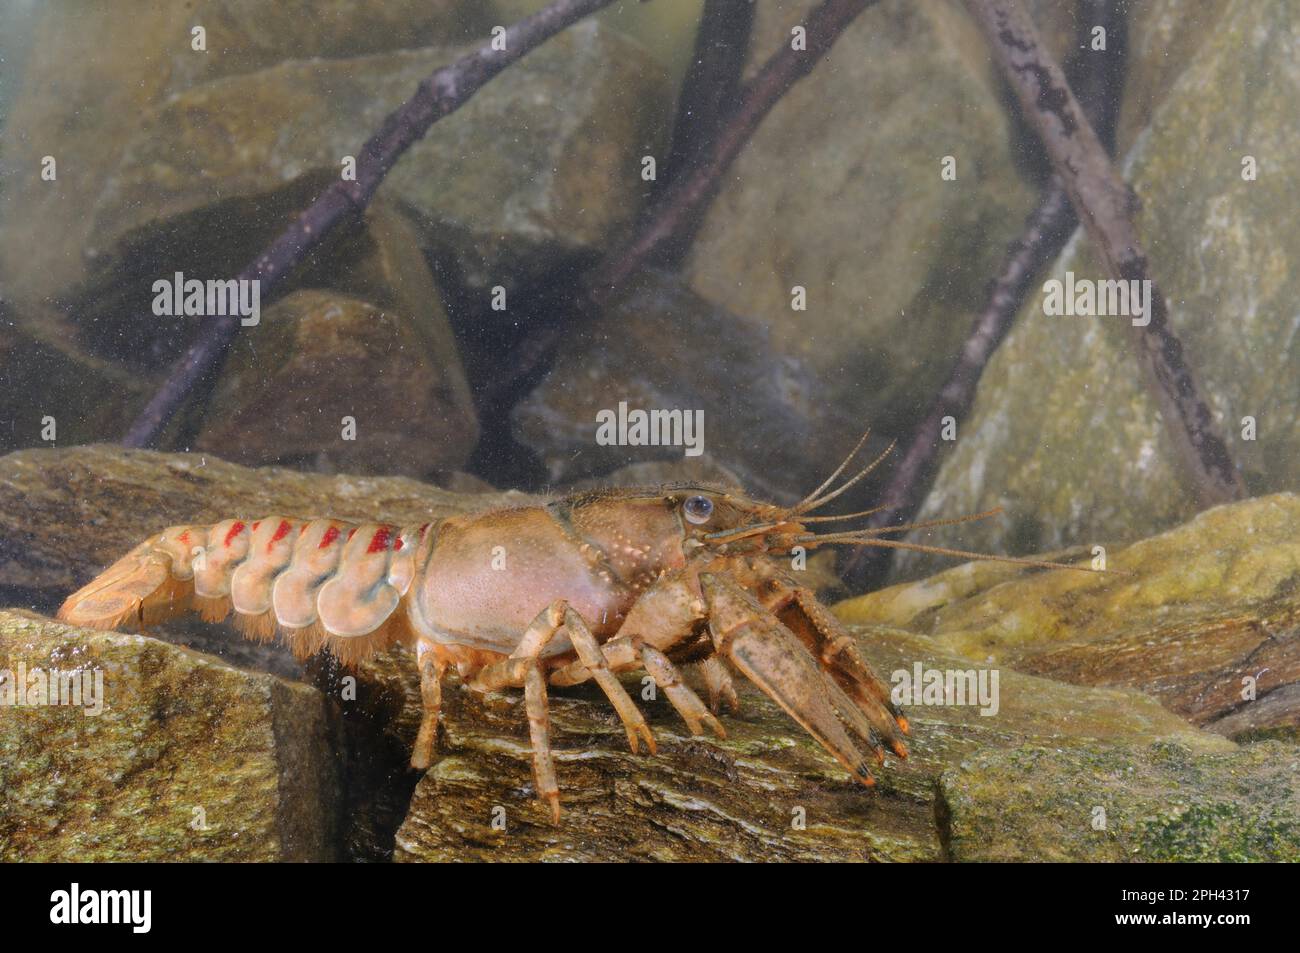 American River Crayfish (Orconectes limosus) introduced species, adult male, resting on rocks, Italy Stock Photo